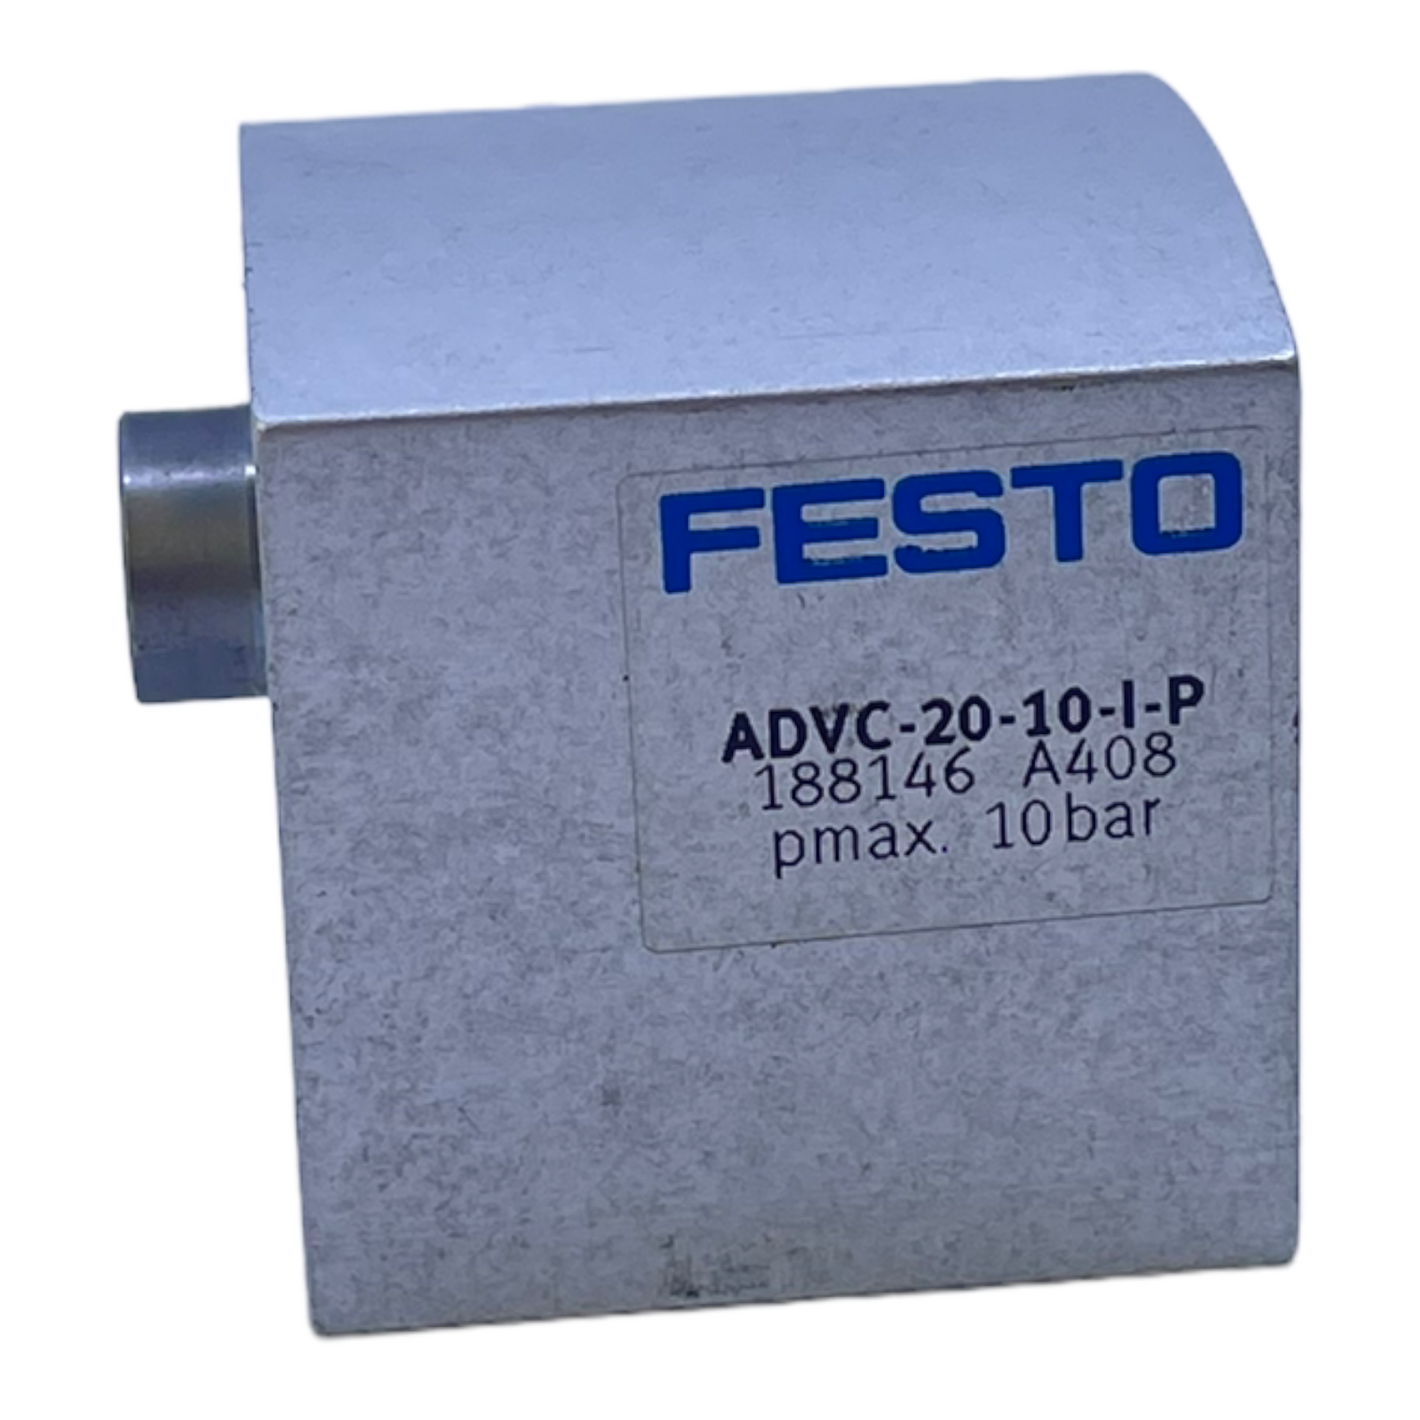 Festo ADVC-20-10-IP short stroke cylinder 188146 1 to 10 bar double acting 188146